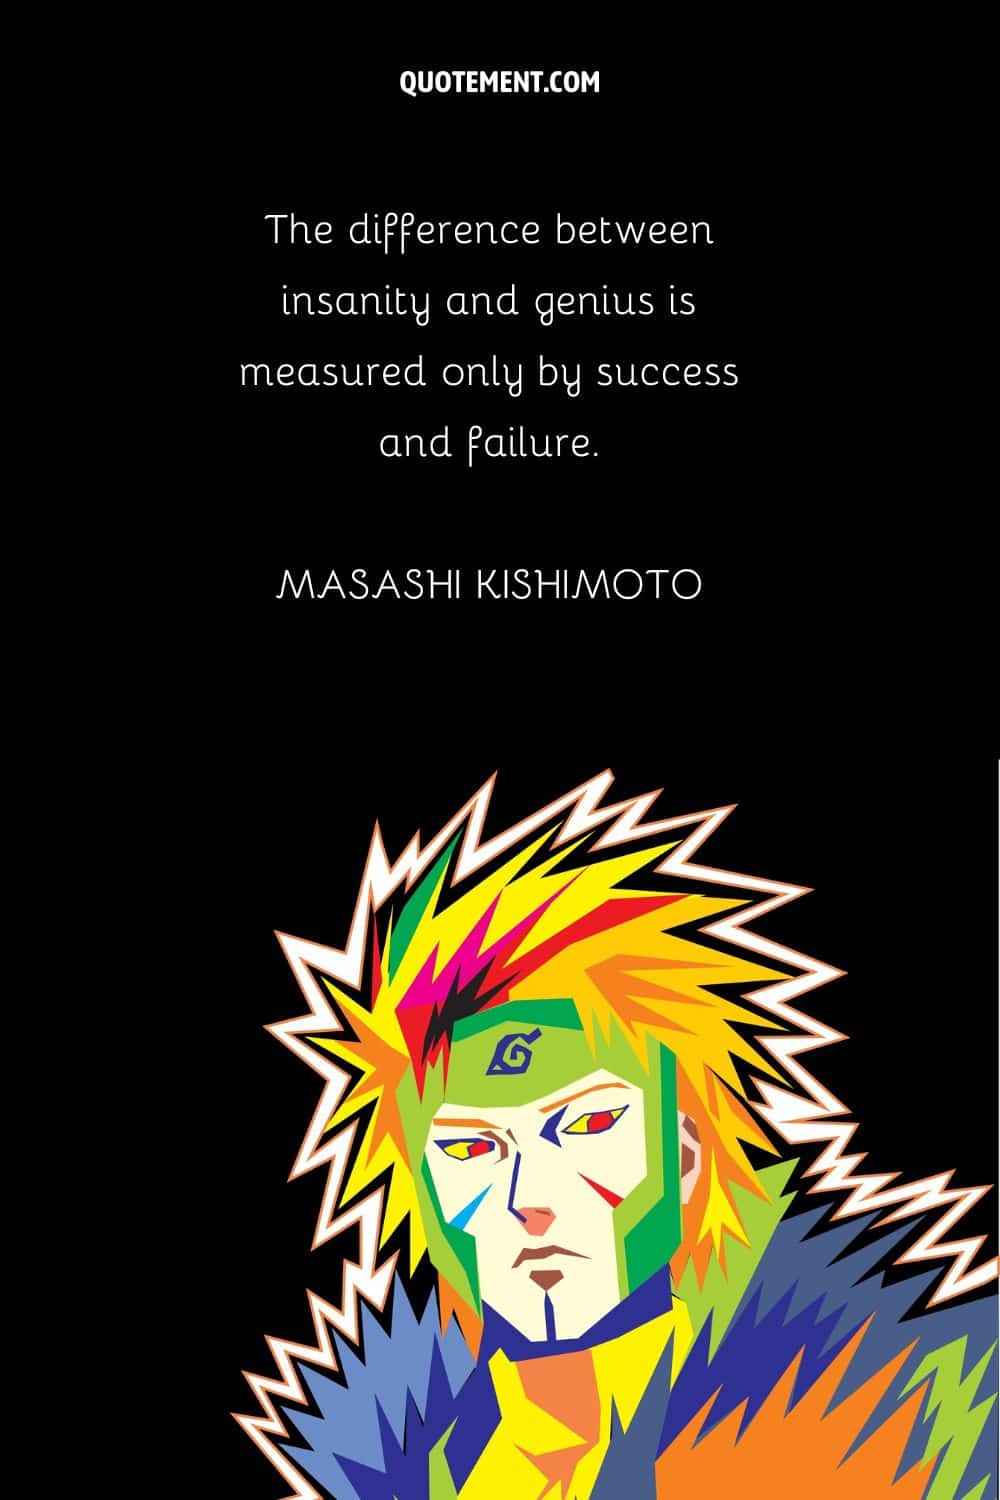 image of Naruto representing famous Naruto quote on life